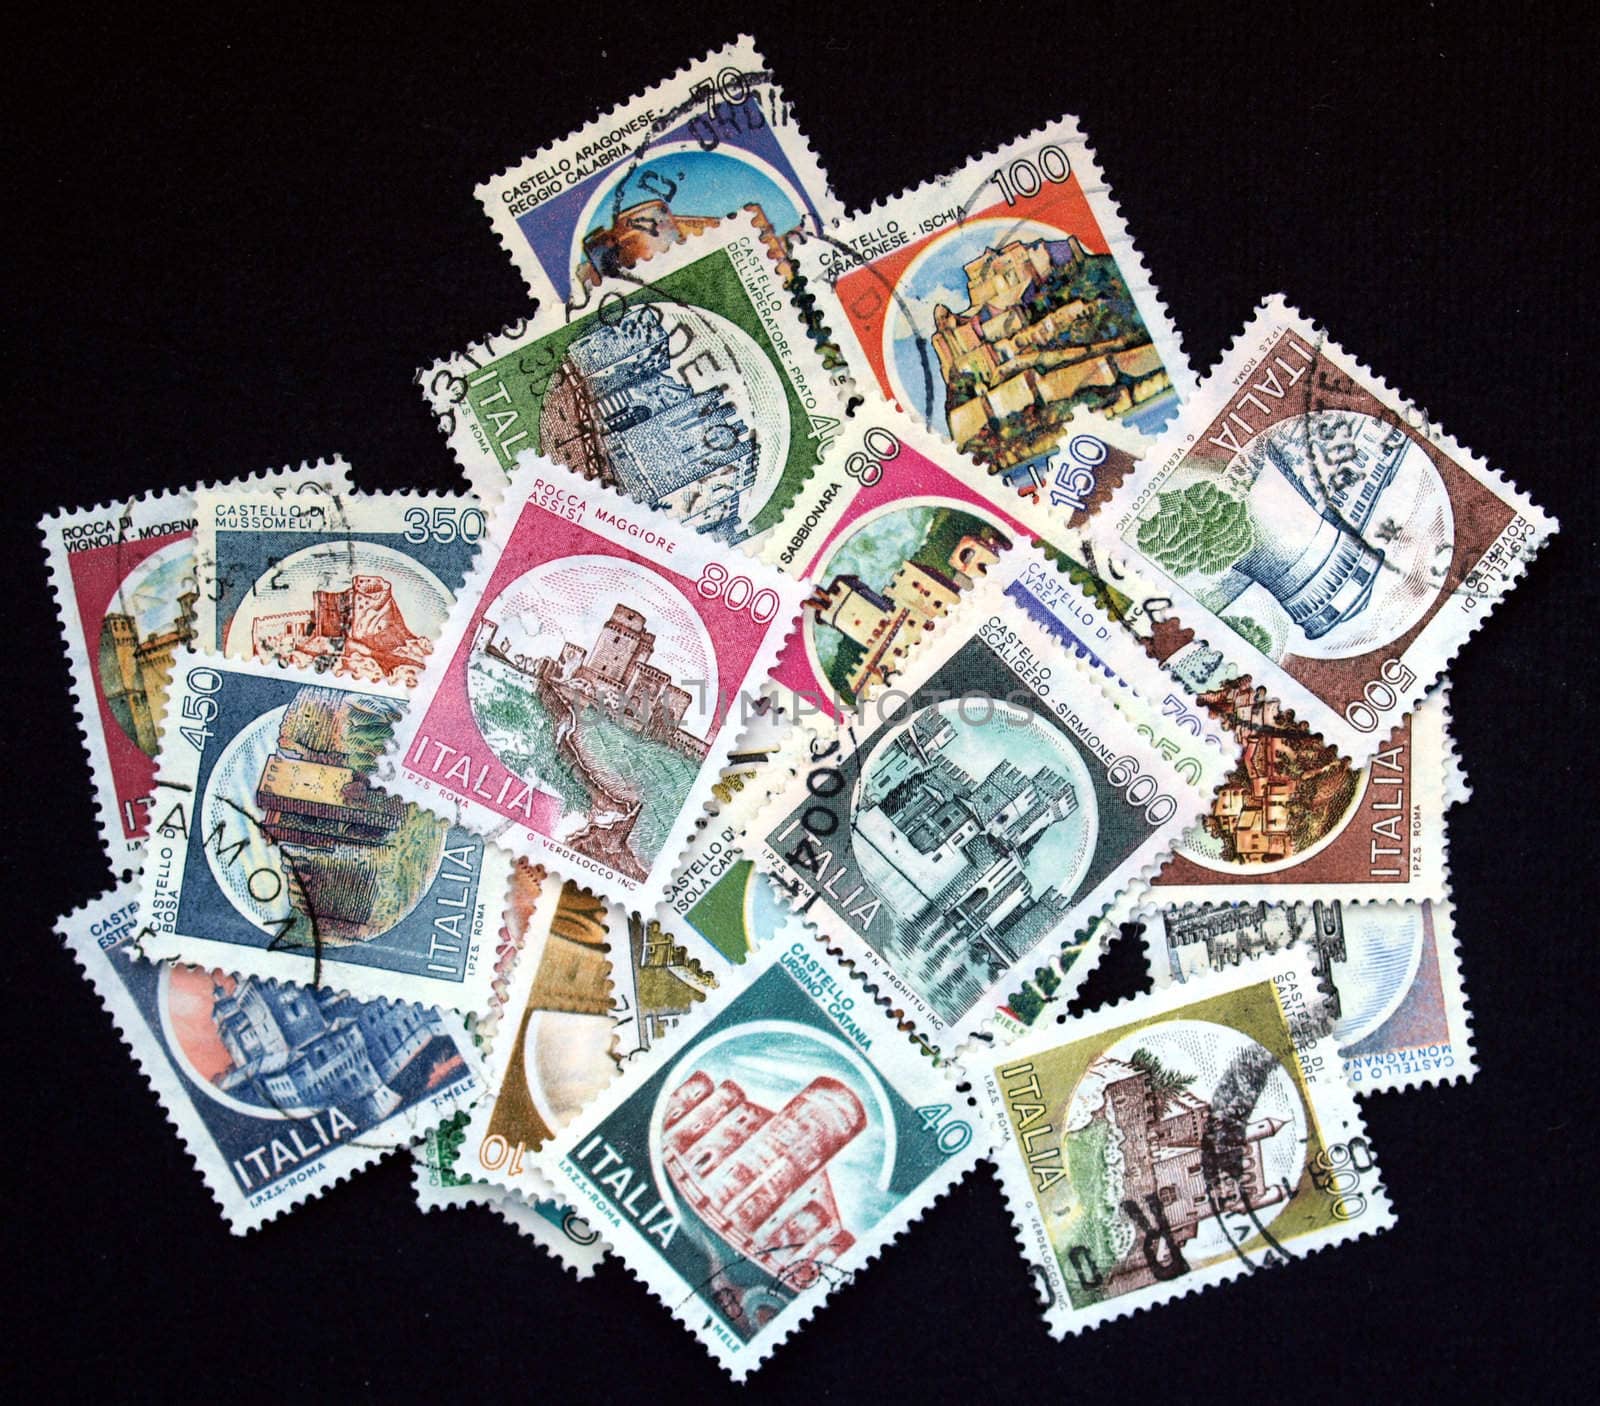 Italian stamp with ancient castles from Italy